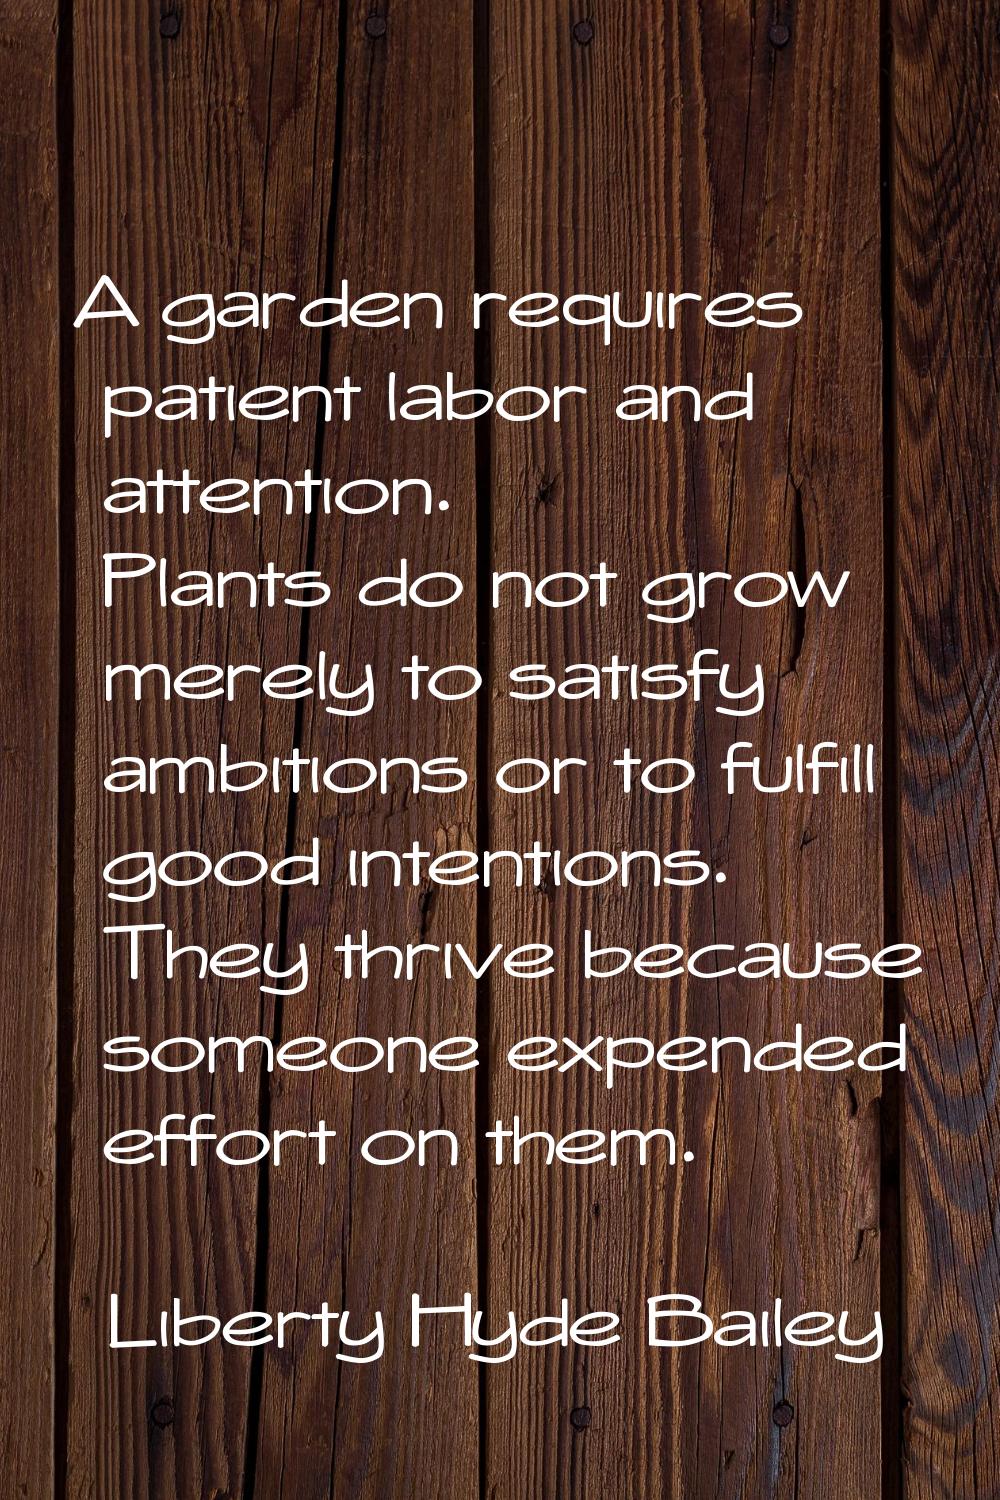 A garden requires patient labor and attention. Plants do not grow merely to satisfy ambitions or to